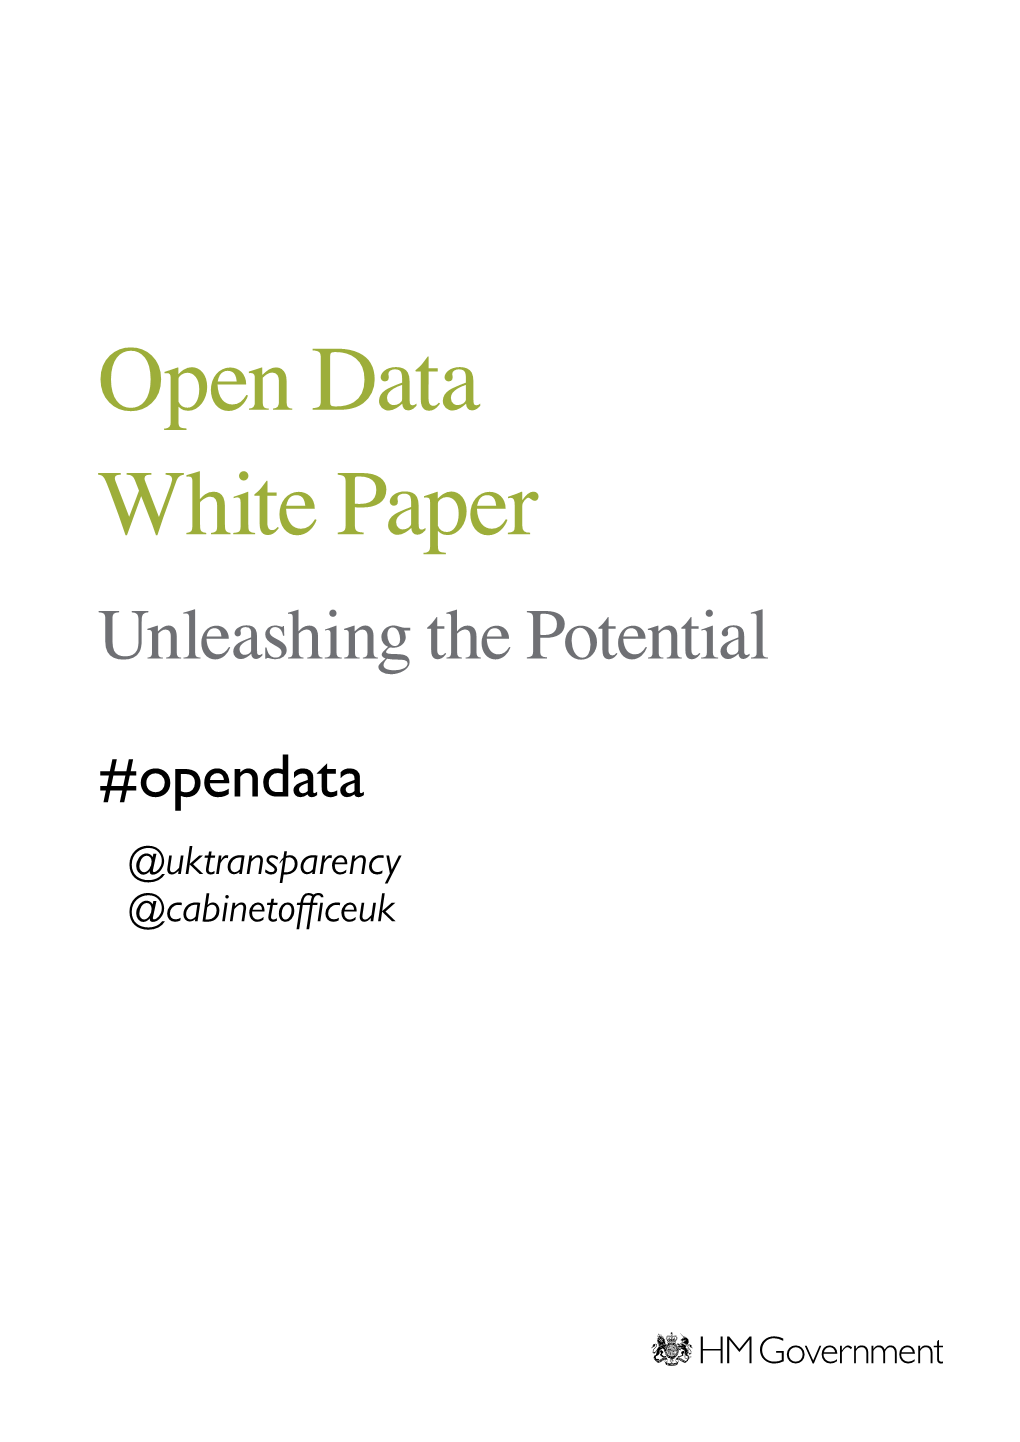 Open Data White Paper Unleashing the Potential #Opendata @Uktransparency @Cabinetofficeuk Open Data White Paper Unleashing the Potential